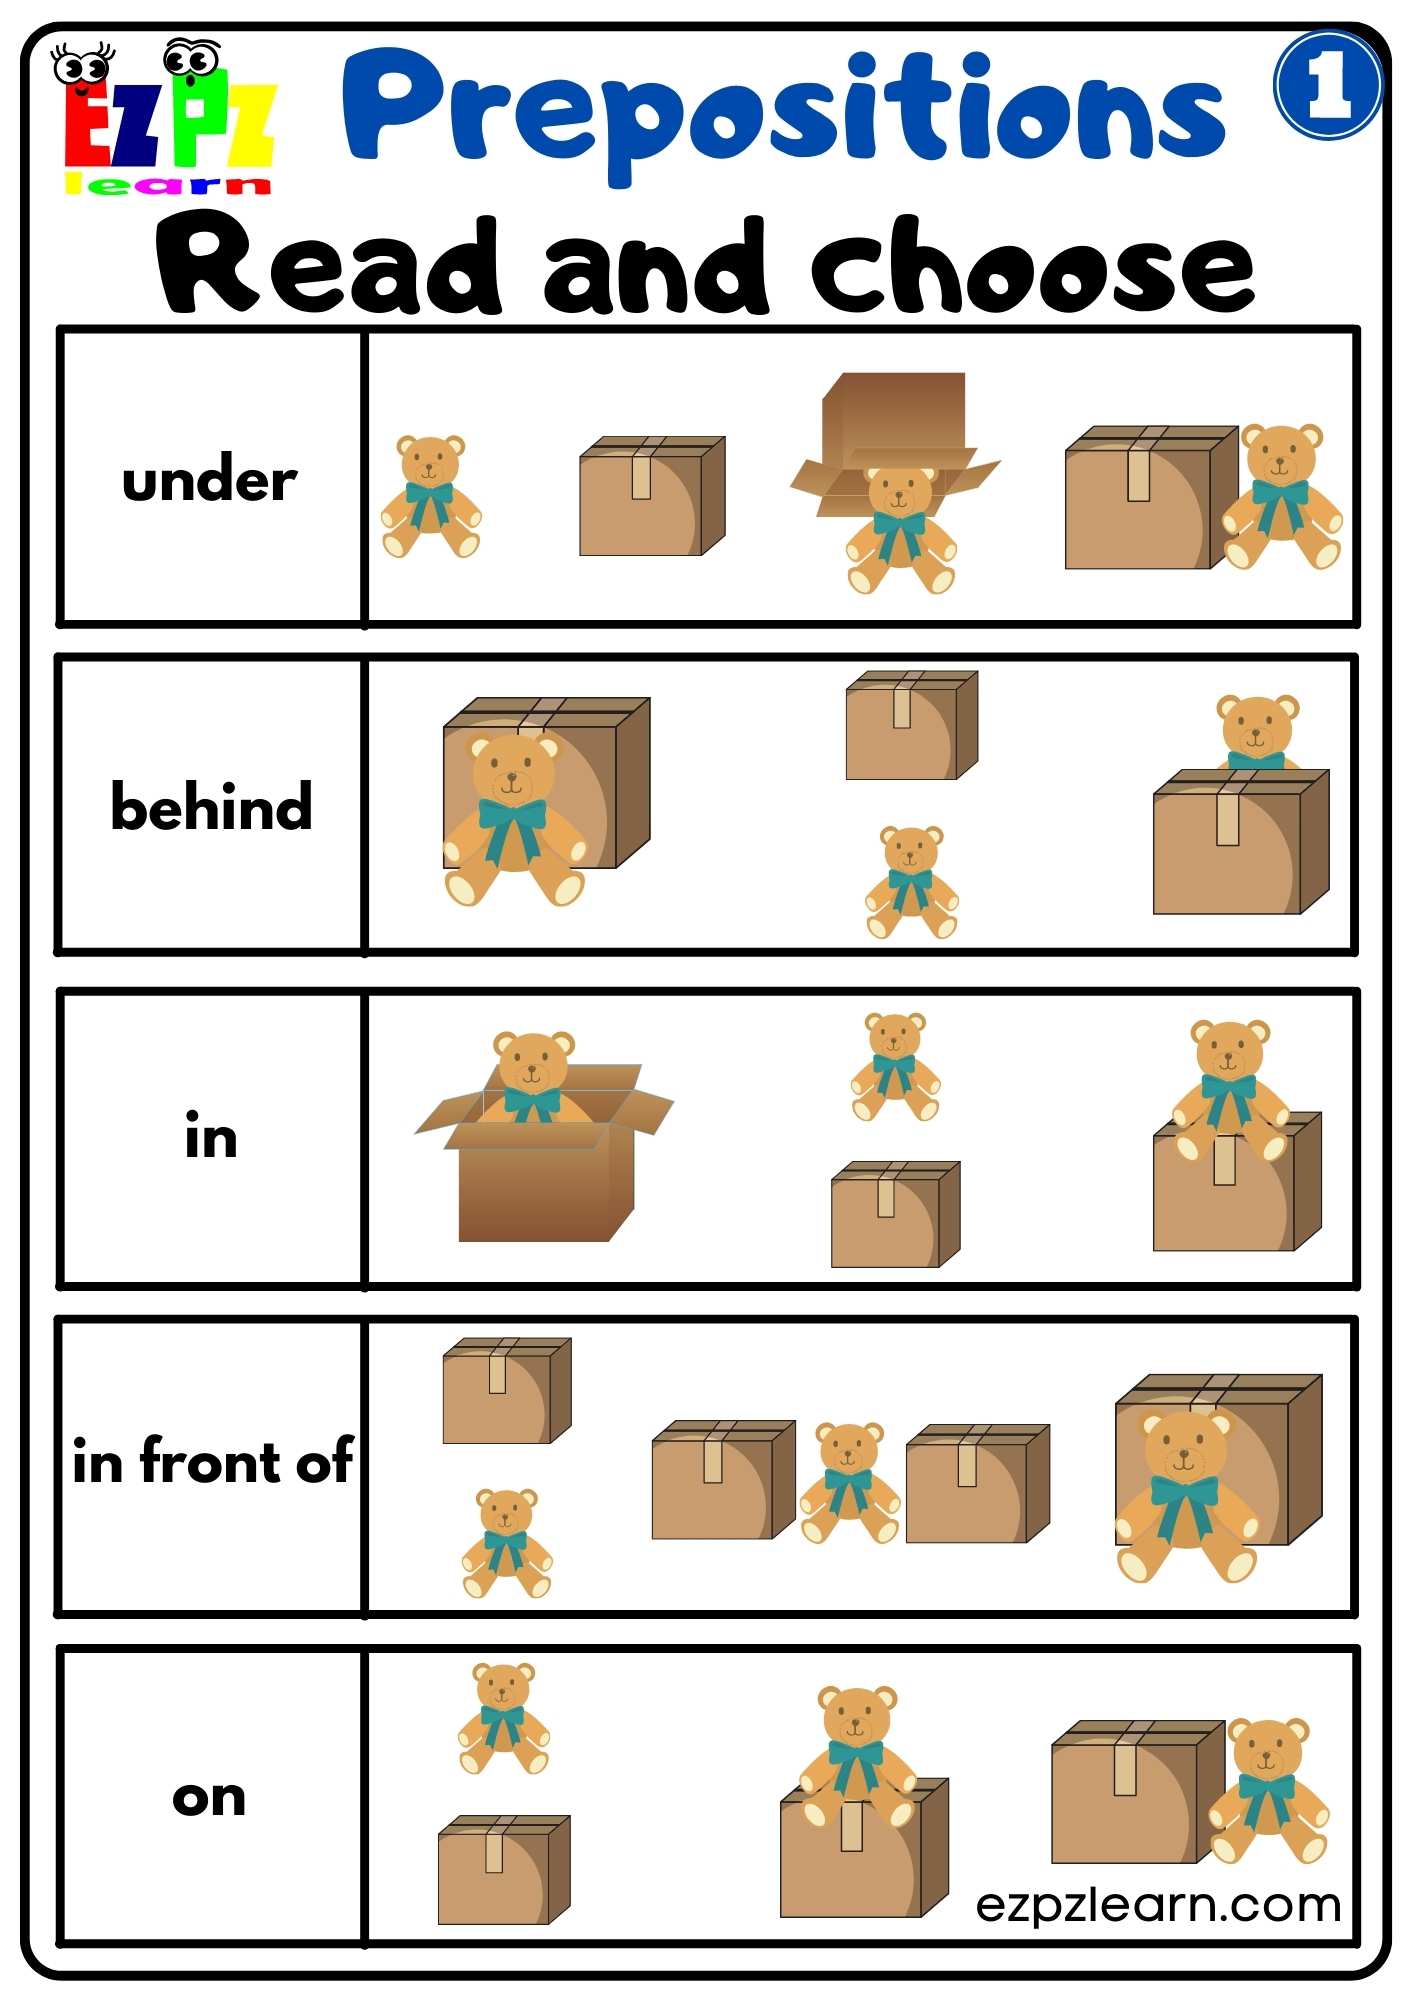 in, under, on, Prepositions of Place, English Lesson for Children